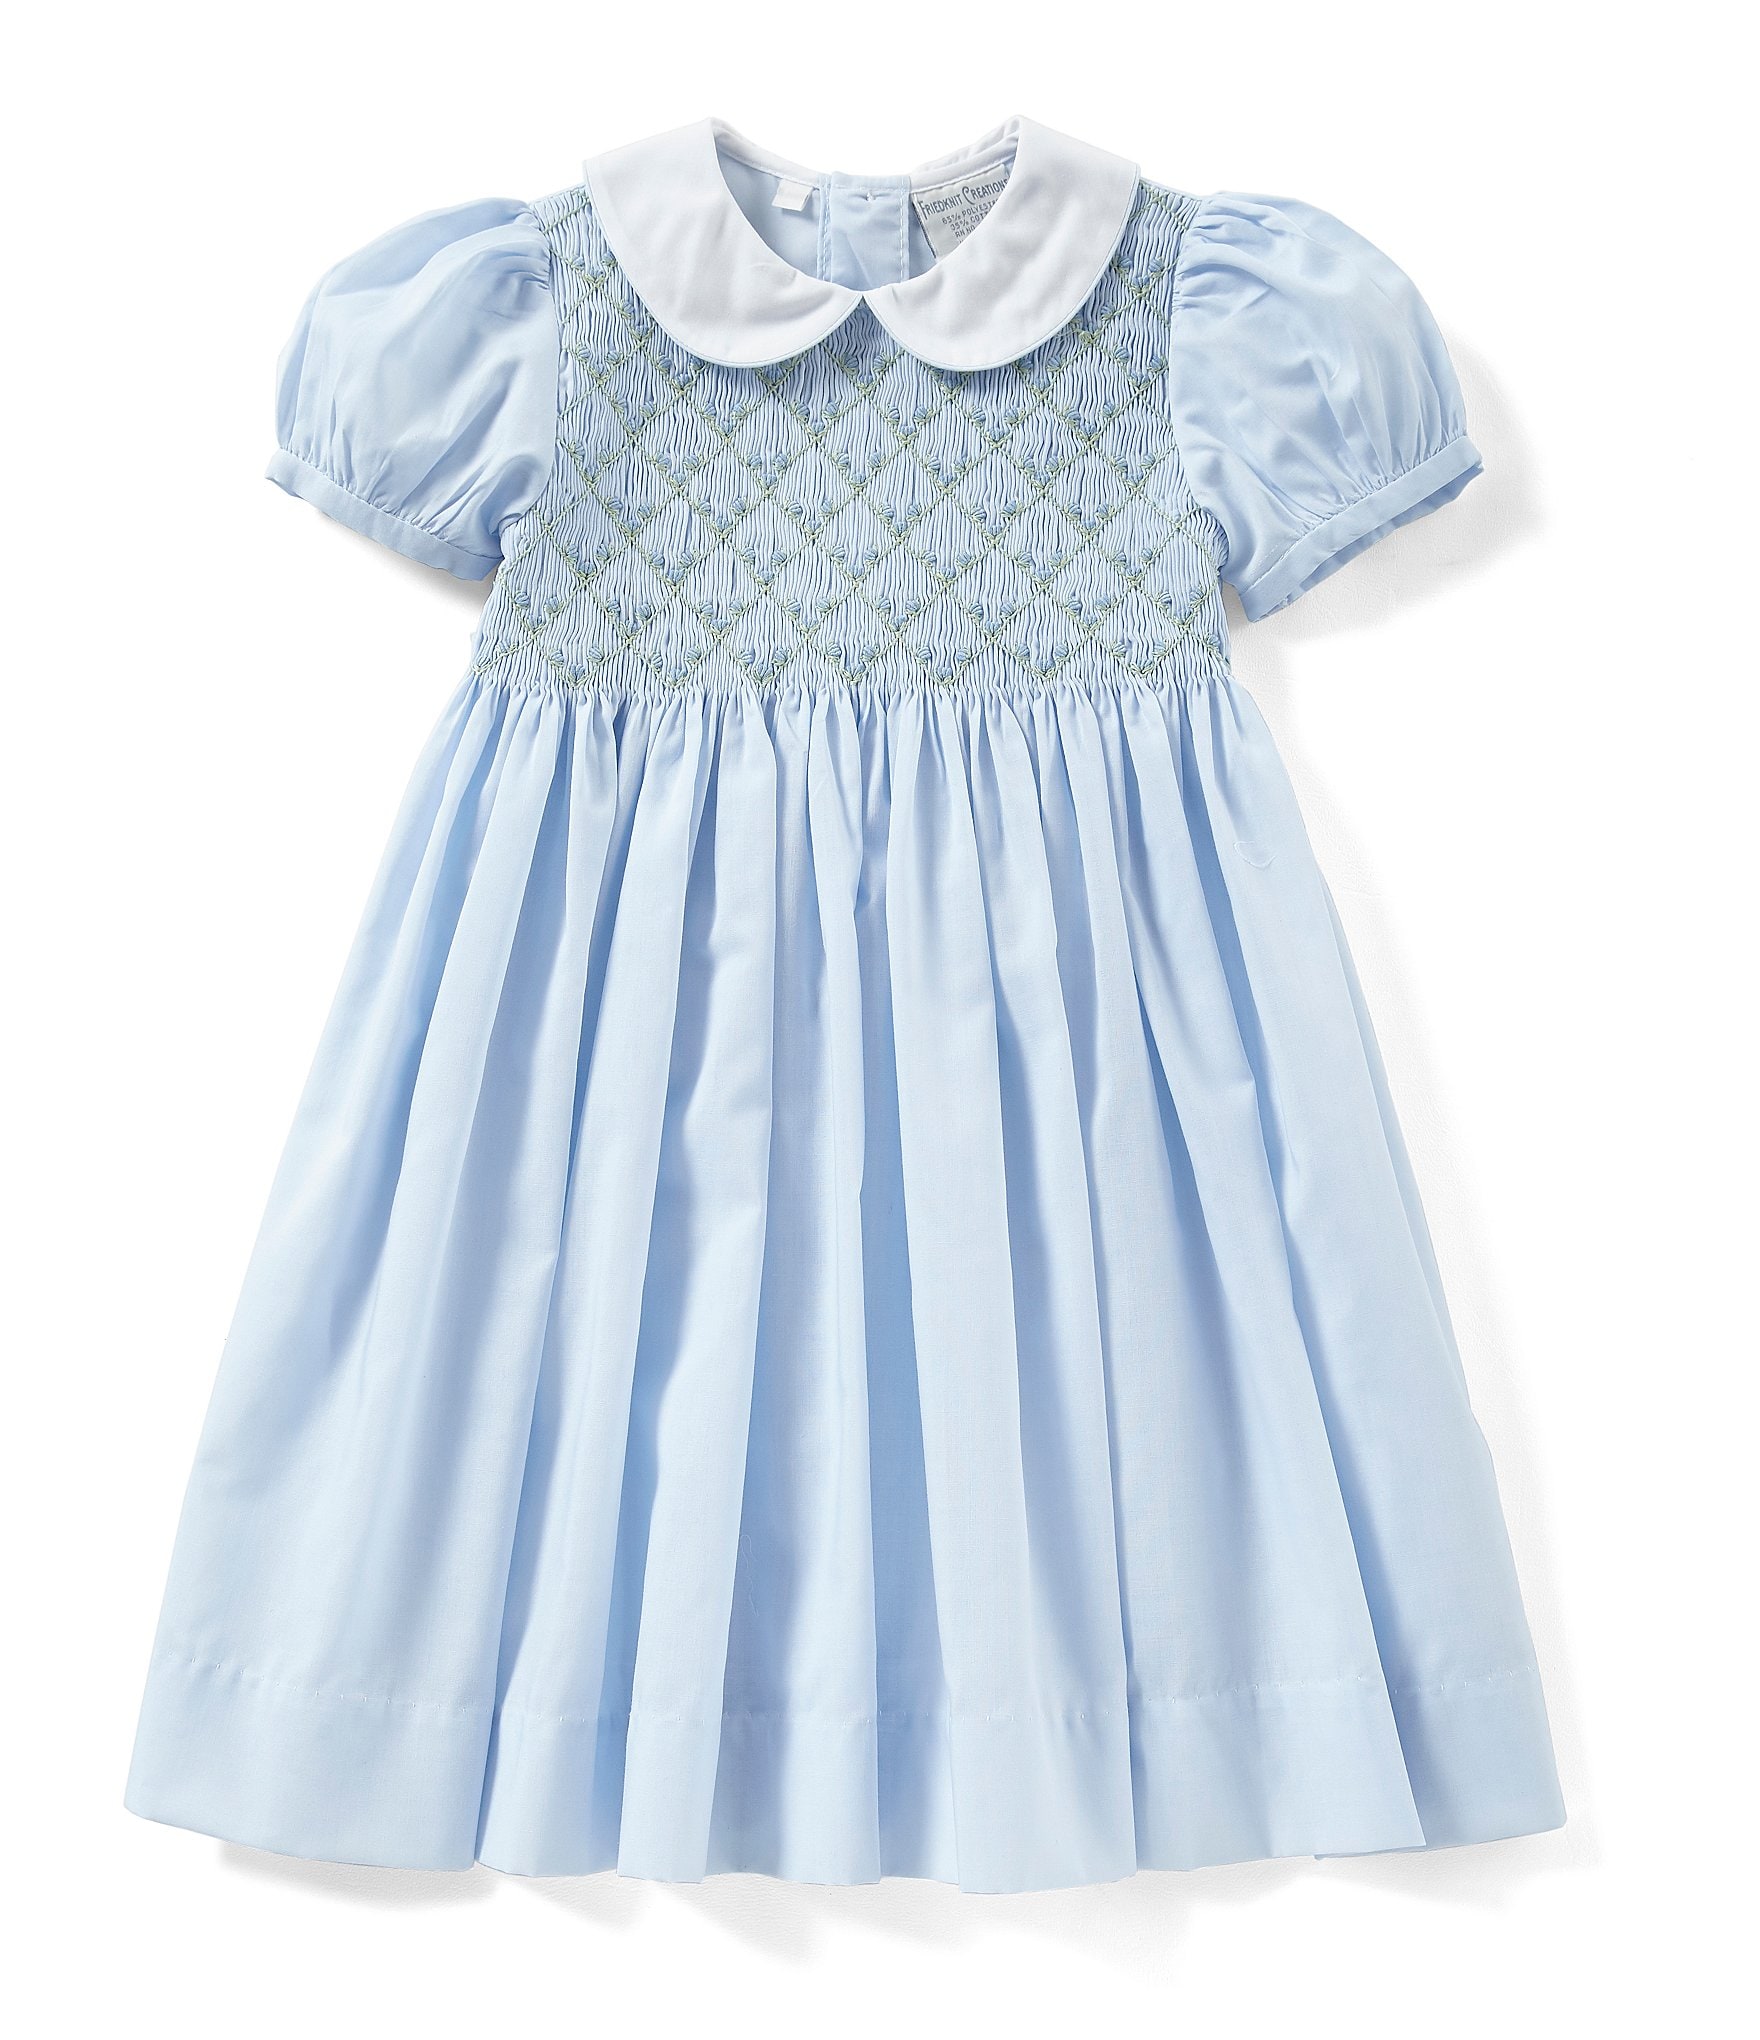 Friedknit Creations Baby Girls 12-24 Months Floral Printed Smocked Dress |  Dillard's